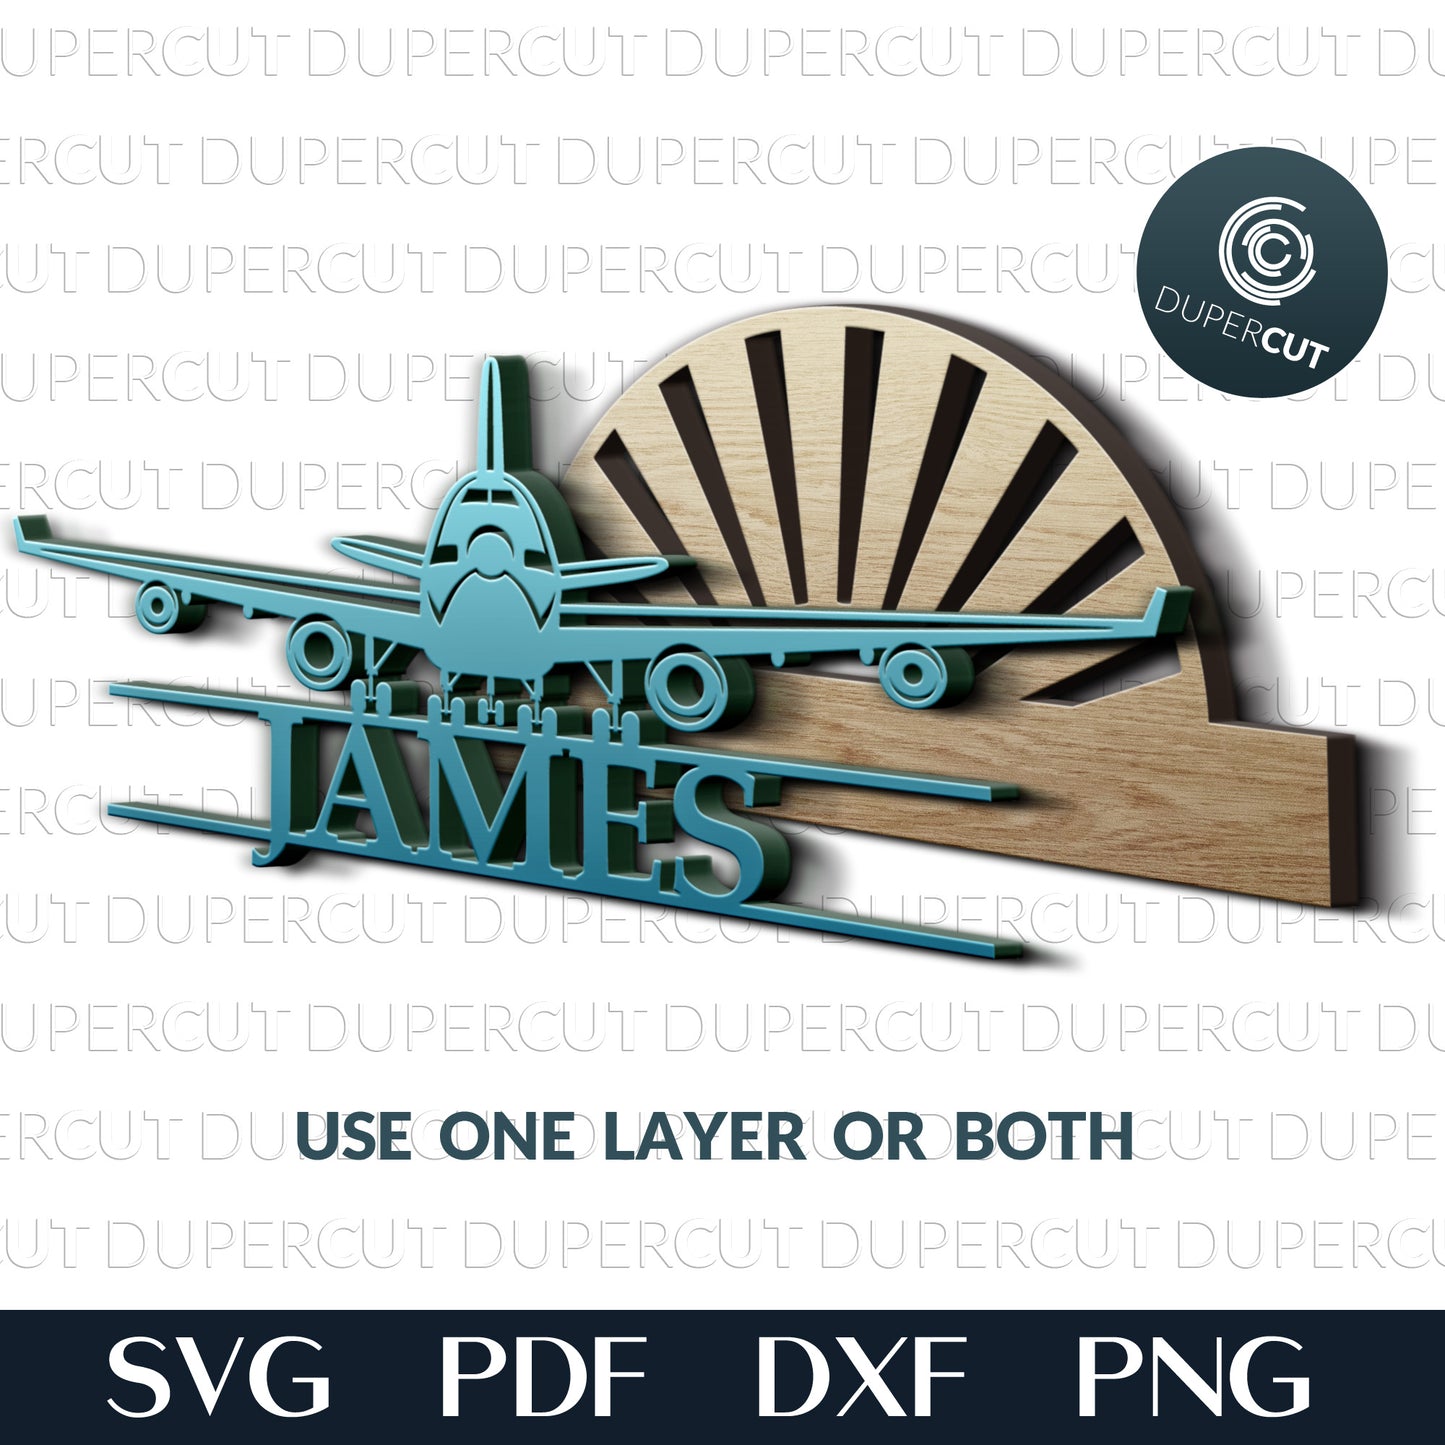 Airplane name sign - add custom text - SVG EPS DXF files for laser cutting with Glowforge, Cricut, Silhouette, CNC plasma machines by DuperCut